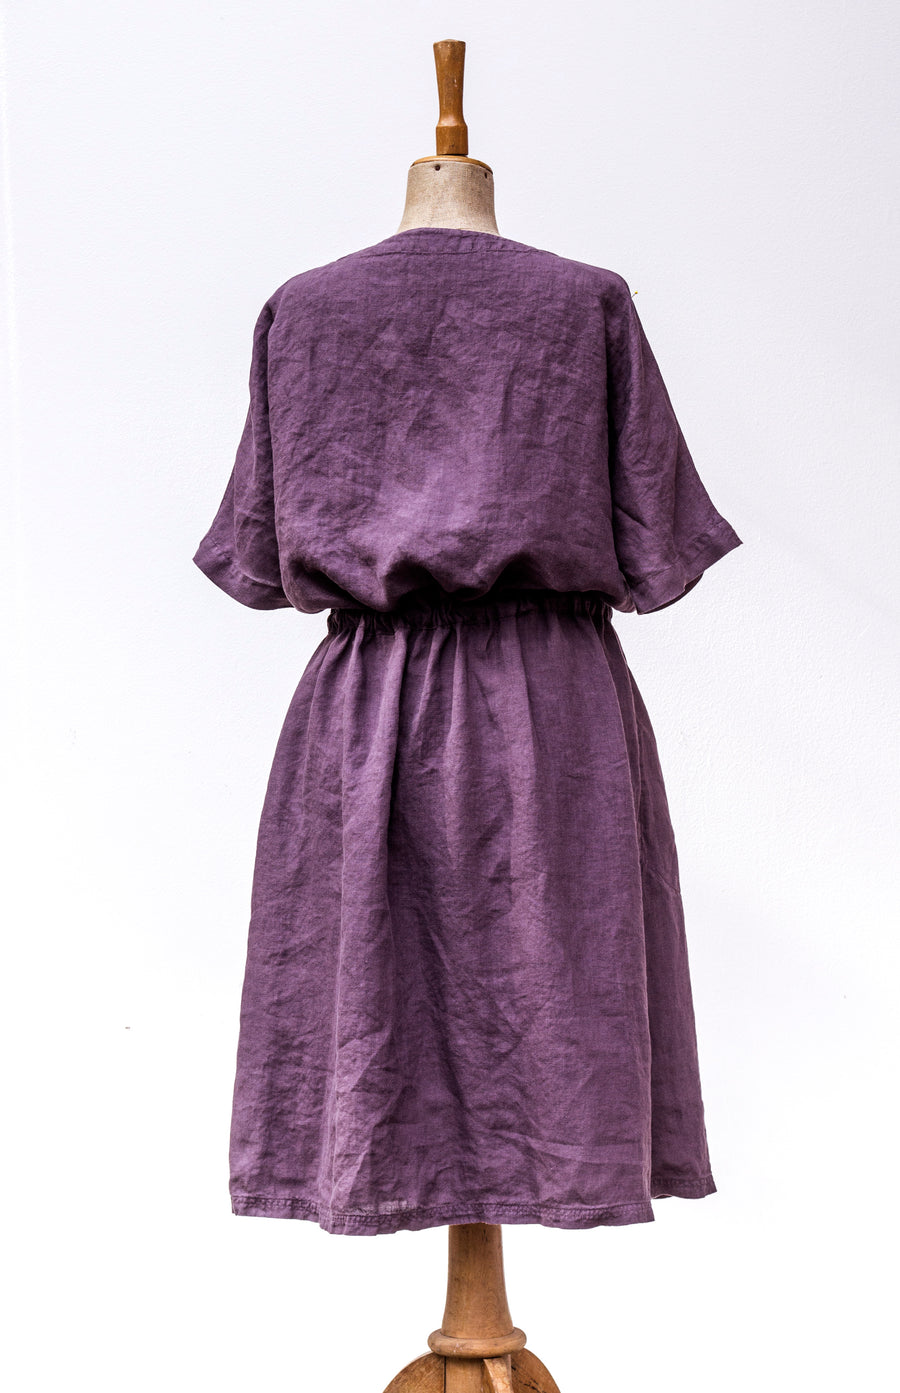 Extra soft button-up dress in the shade of Black Plum